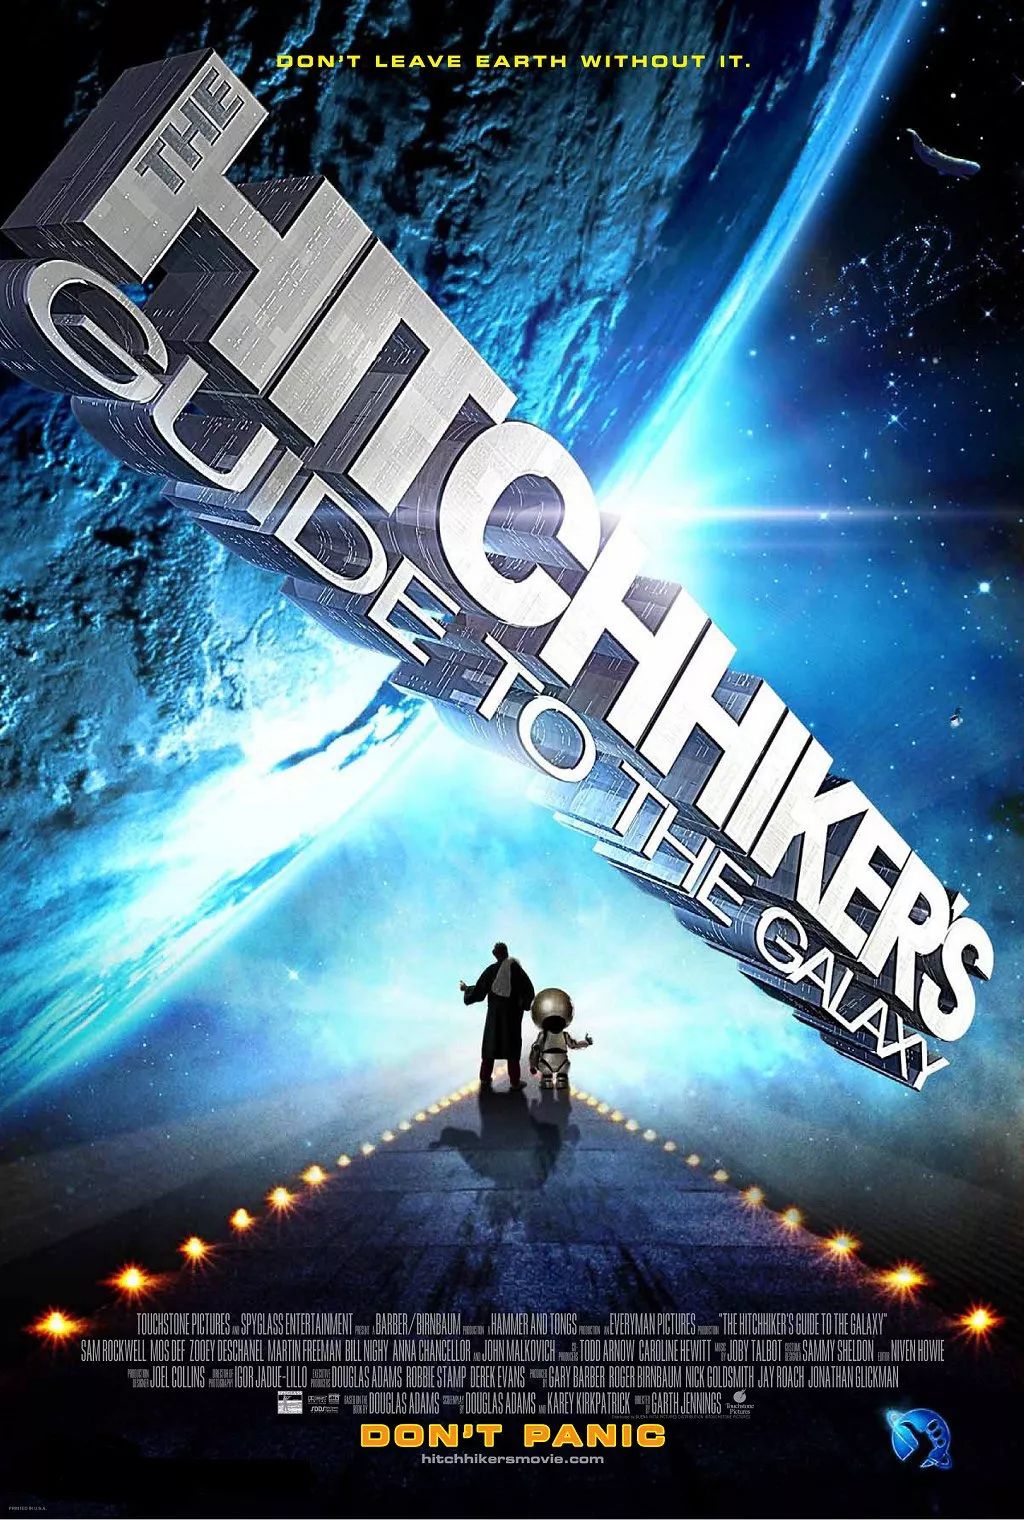 You are currently viewing (Old) Film Review – The Hitchhiker’s Guide to the Galaxy